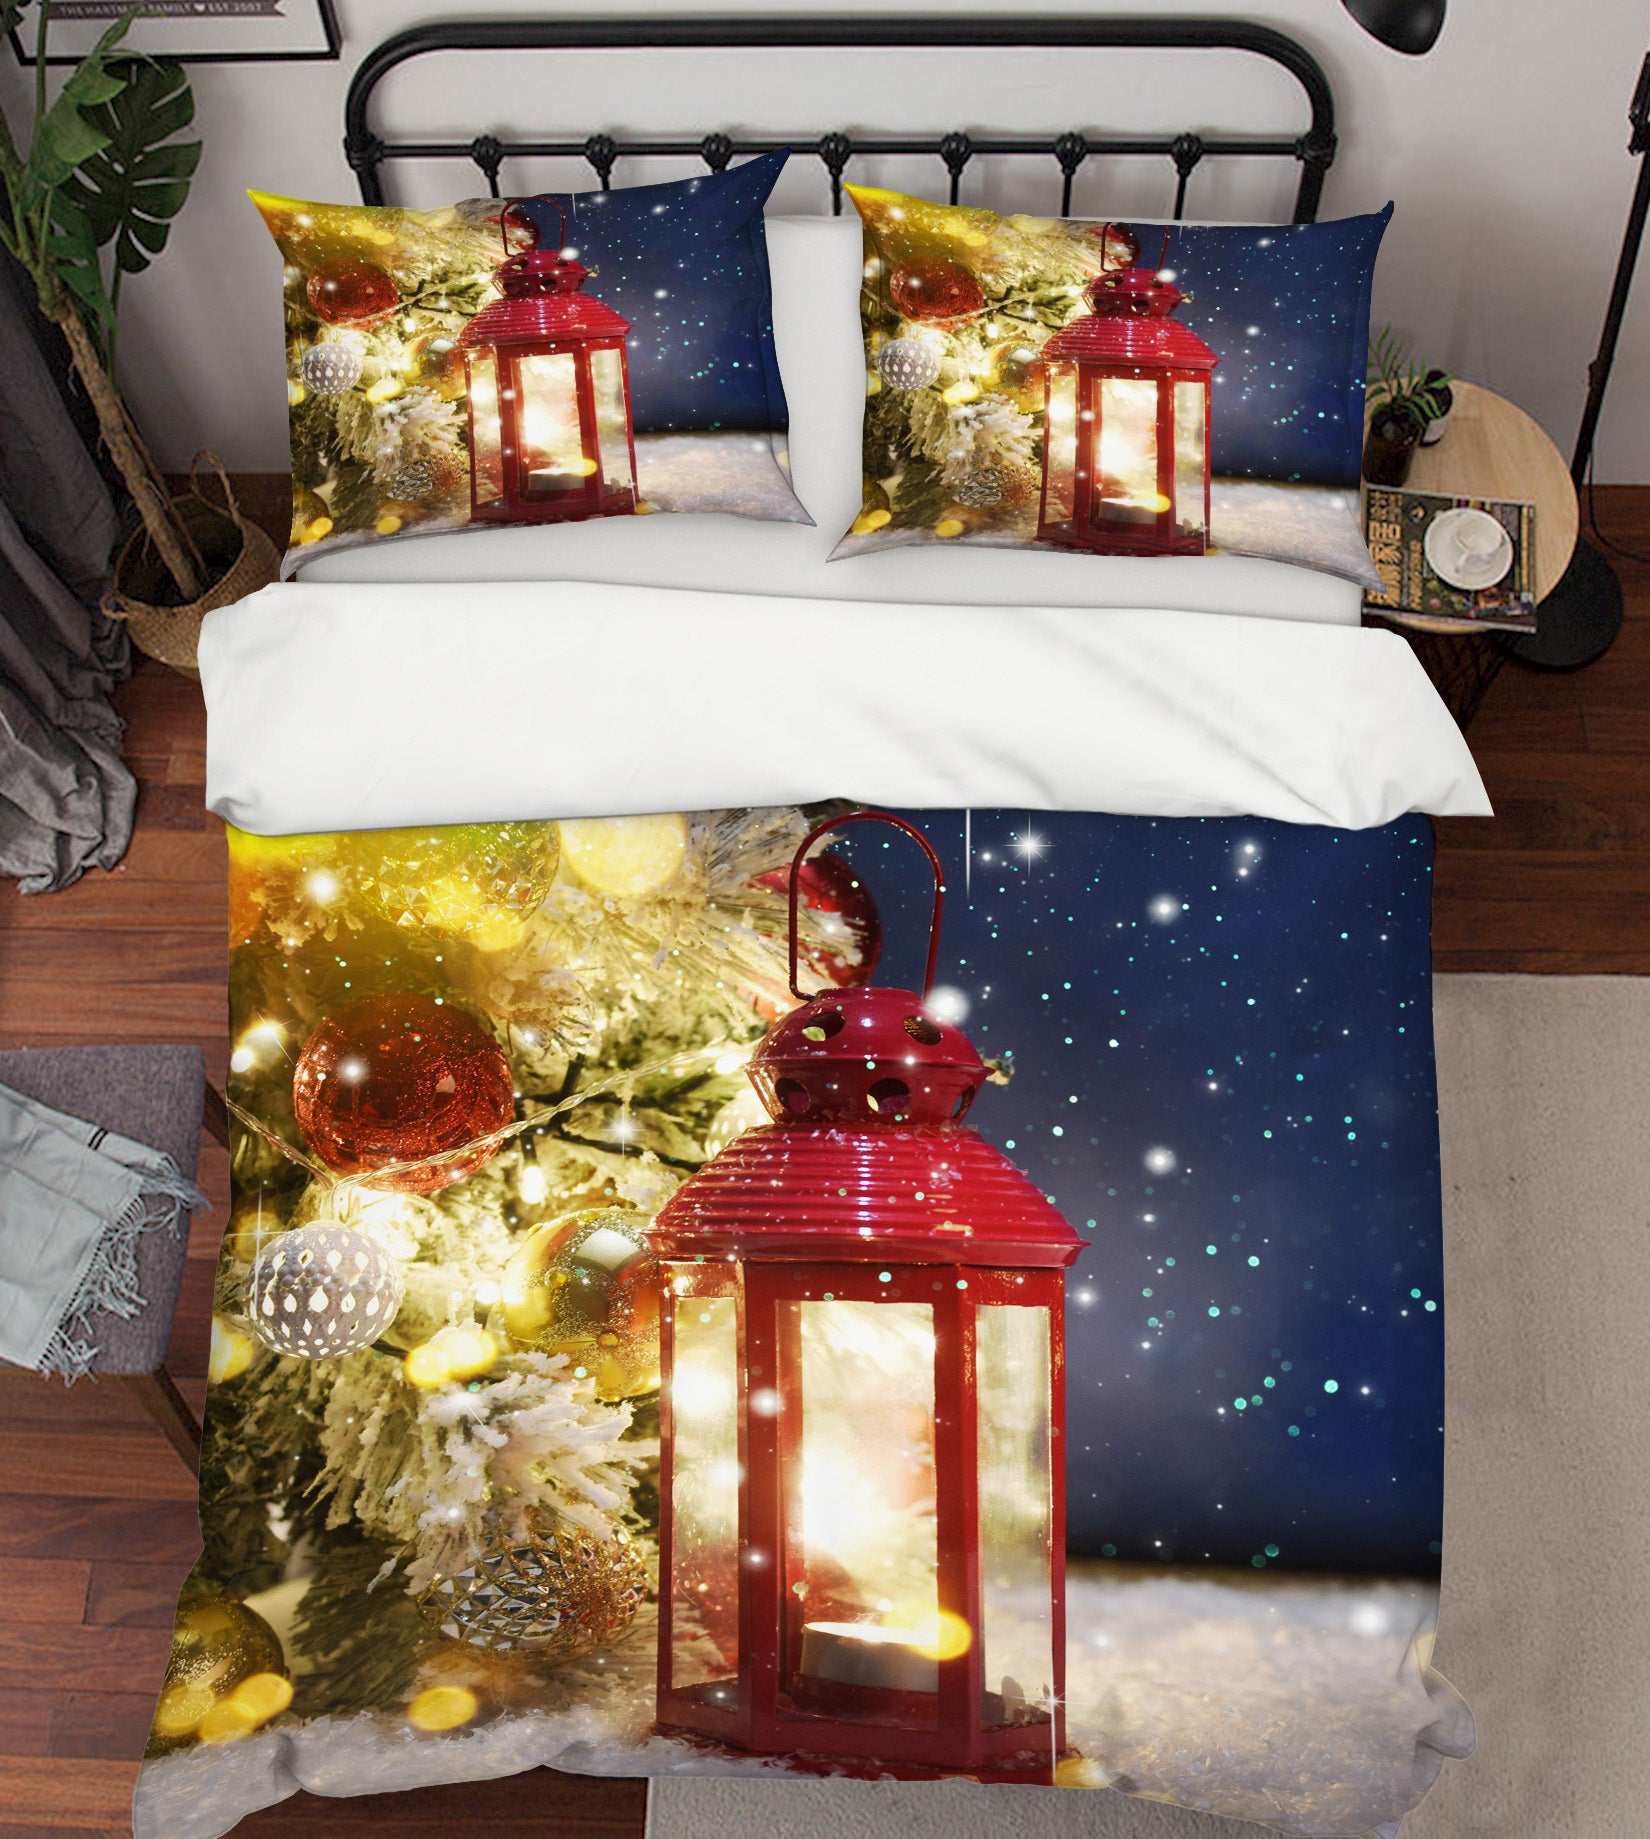 3D Candle Light 51114 Christmas Quilt Duvet Cover Xmas Bed Pillowcases